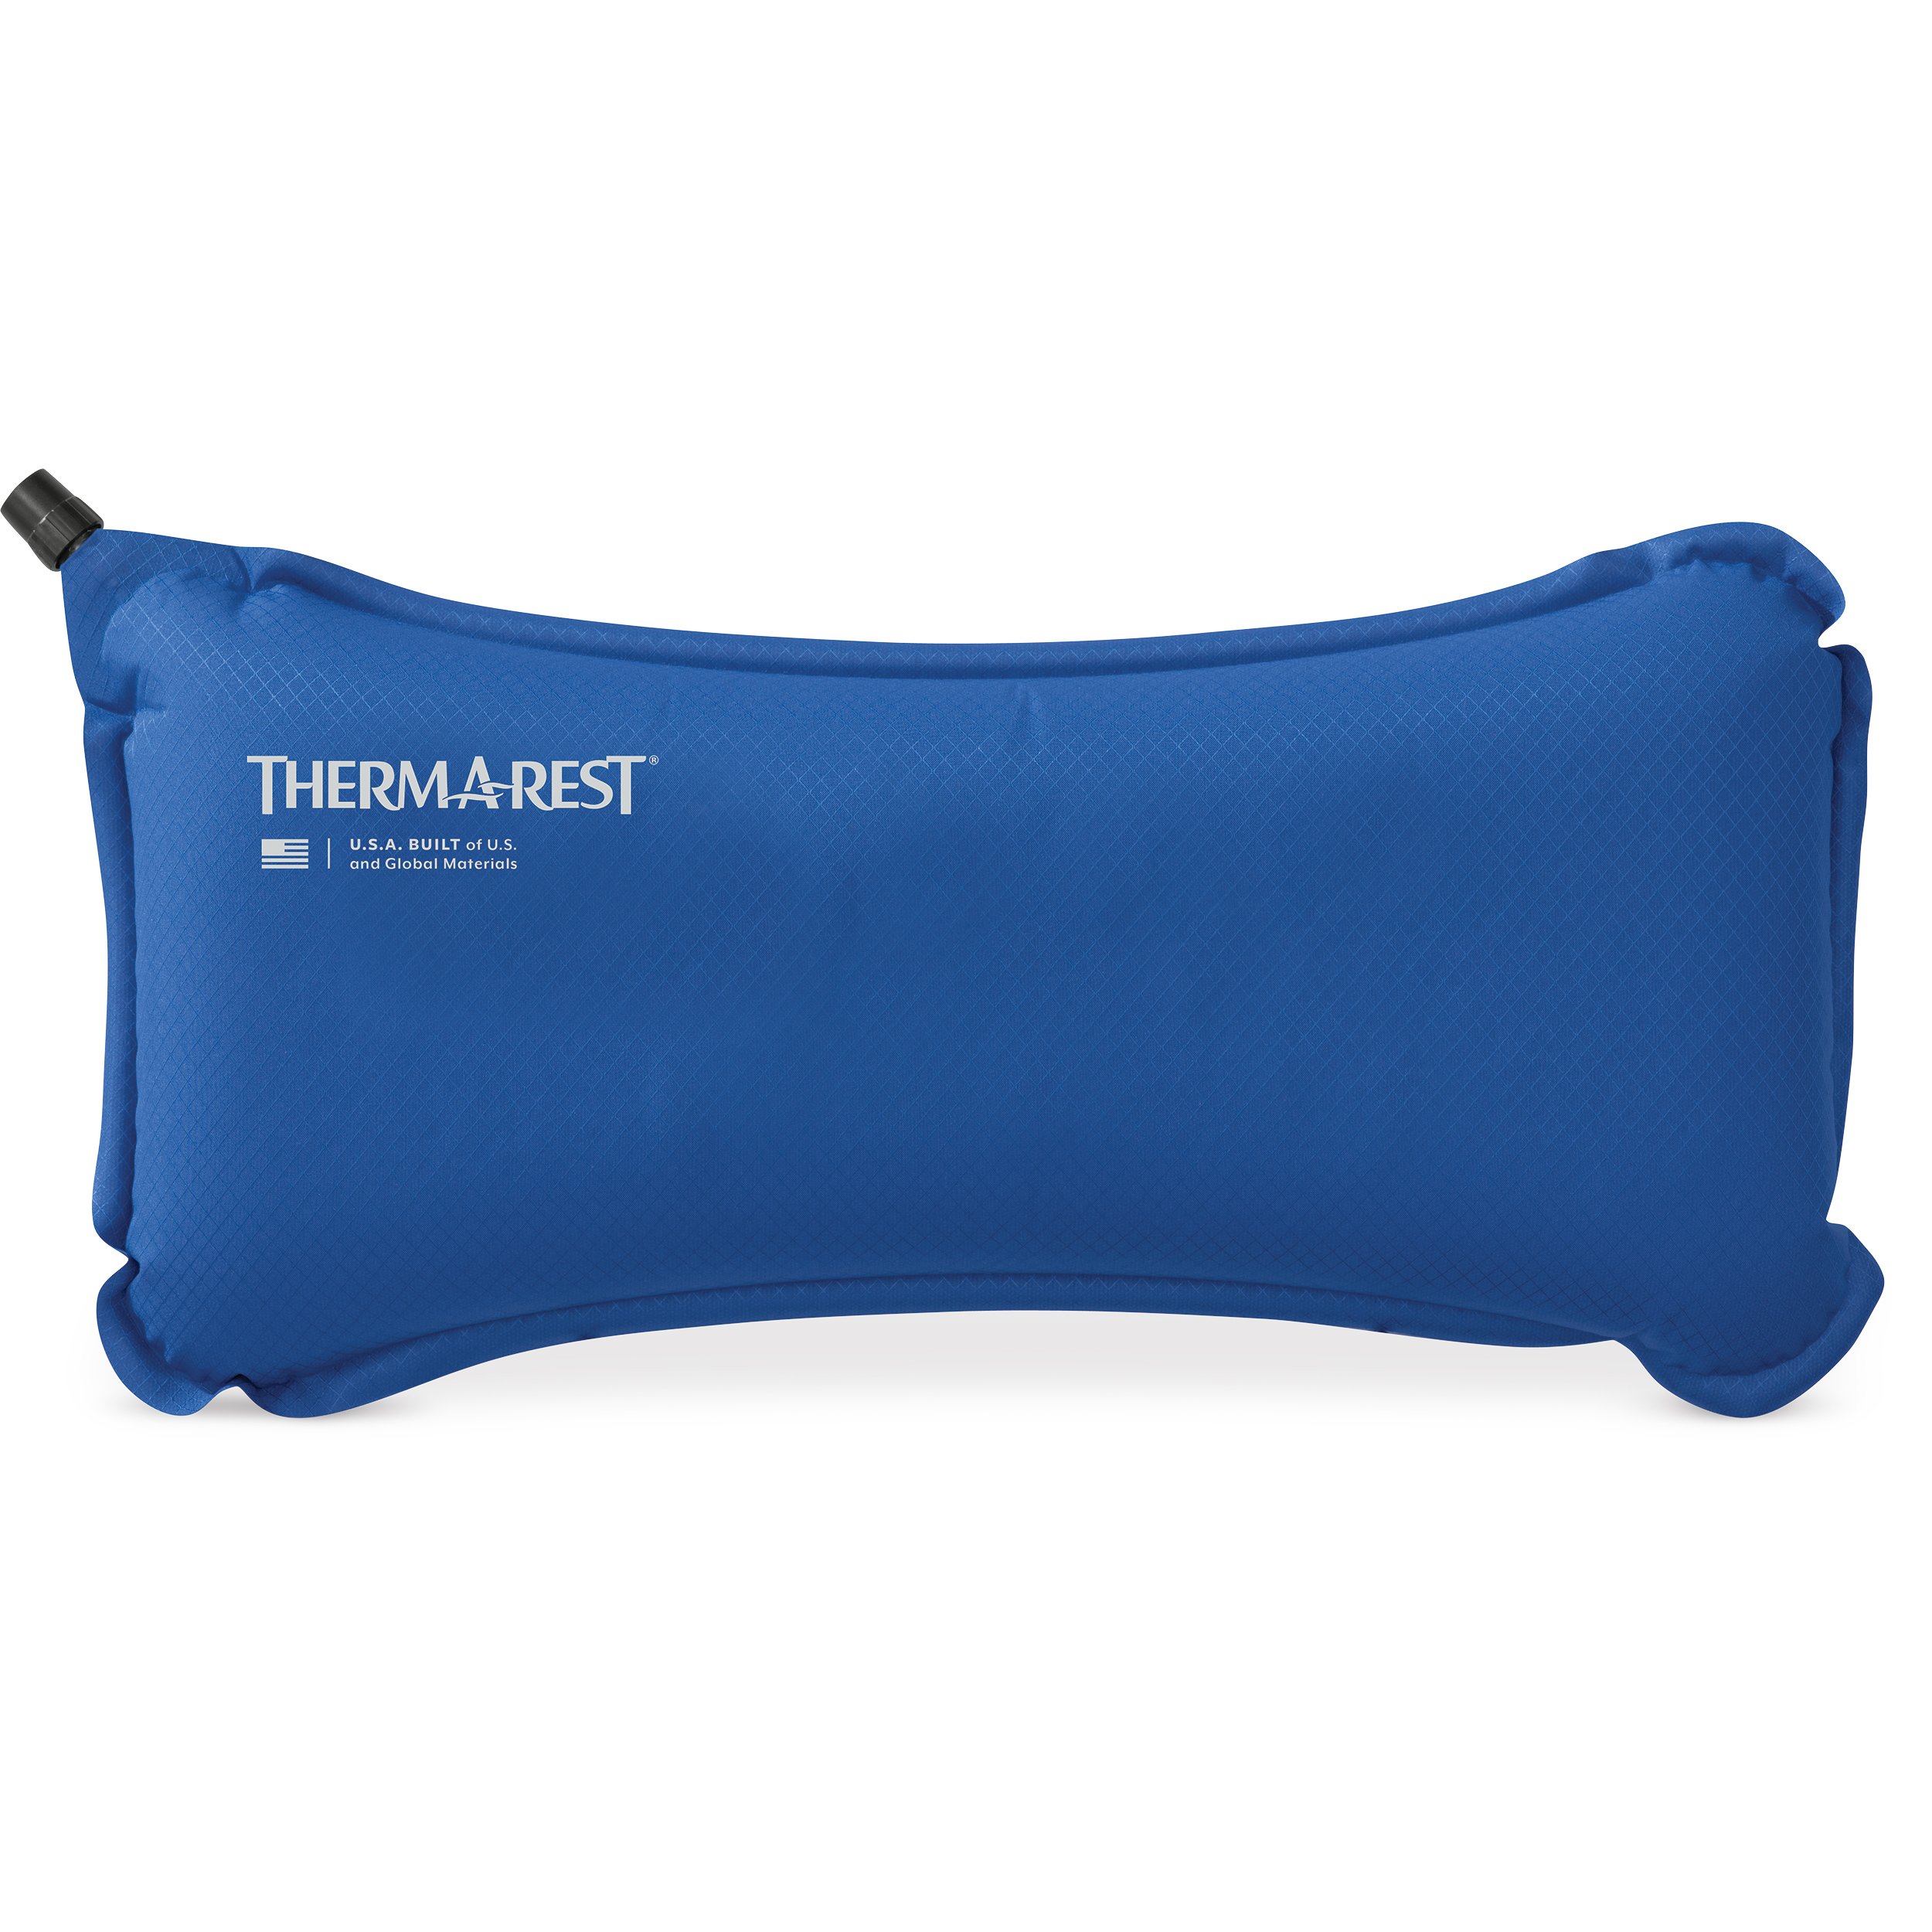 https://www.thermarest.com/on/demandware.static/-/Sites-thermarest-master-catalog/default/dwc7830d56/images/large/06438_tr_lumbar_pillow_nauticalblue_front.jpg